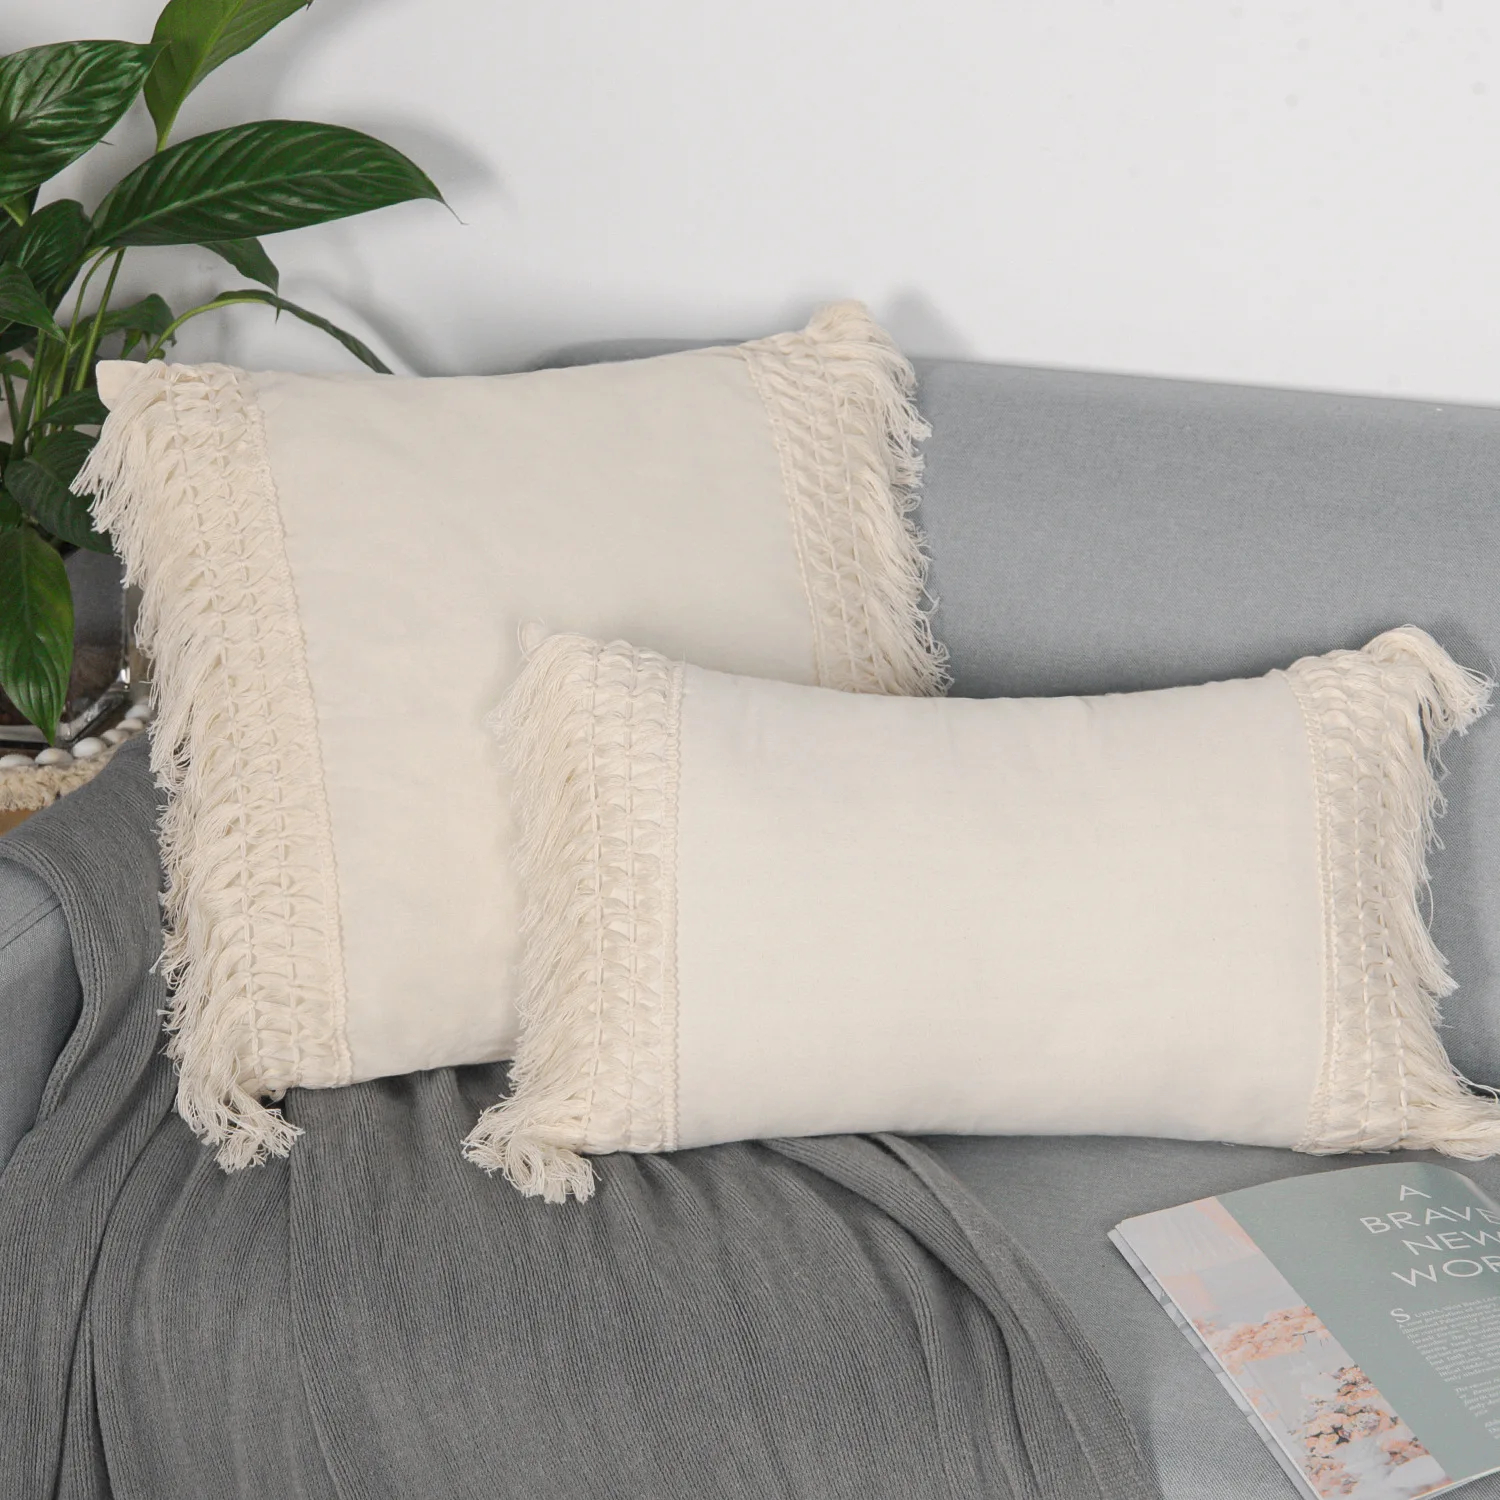 

Nordic Cotton Cushion Cover White Decorative Pillows for Sofa Couch Living Room Pillowcase 45x45/30x50cm with Tassels Decor Home